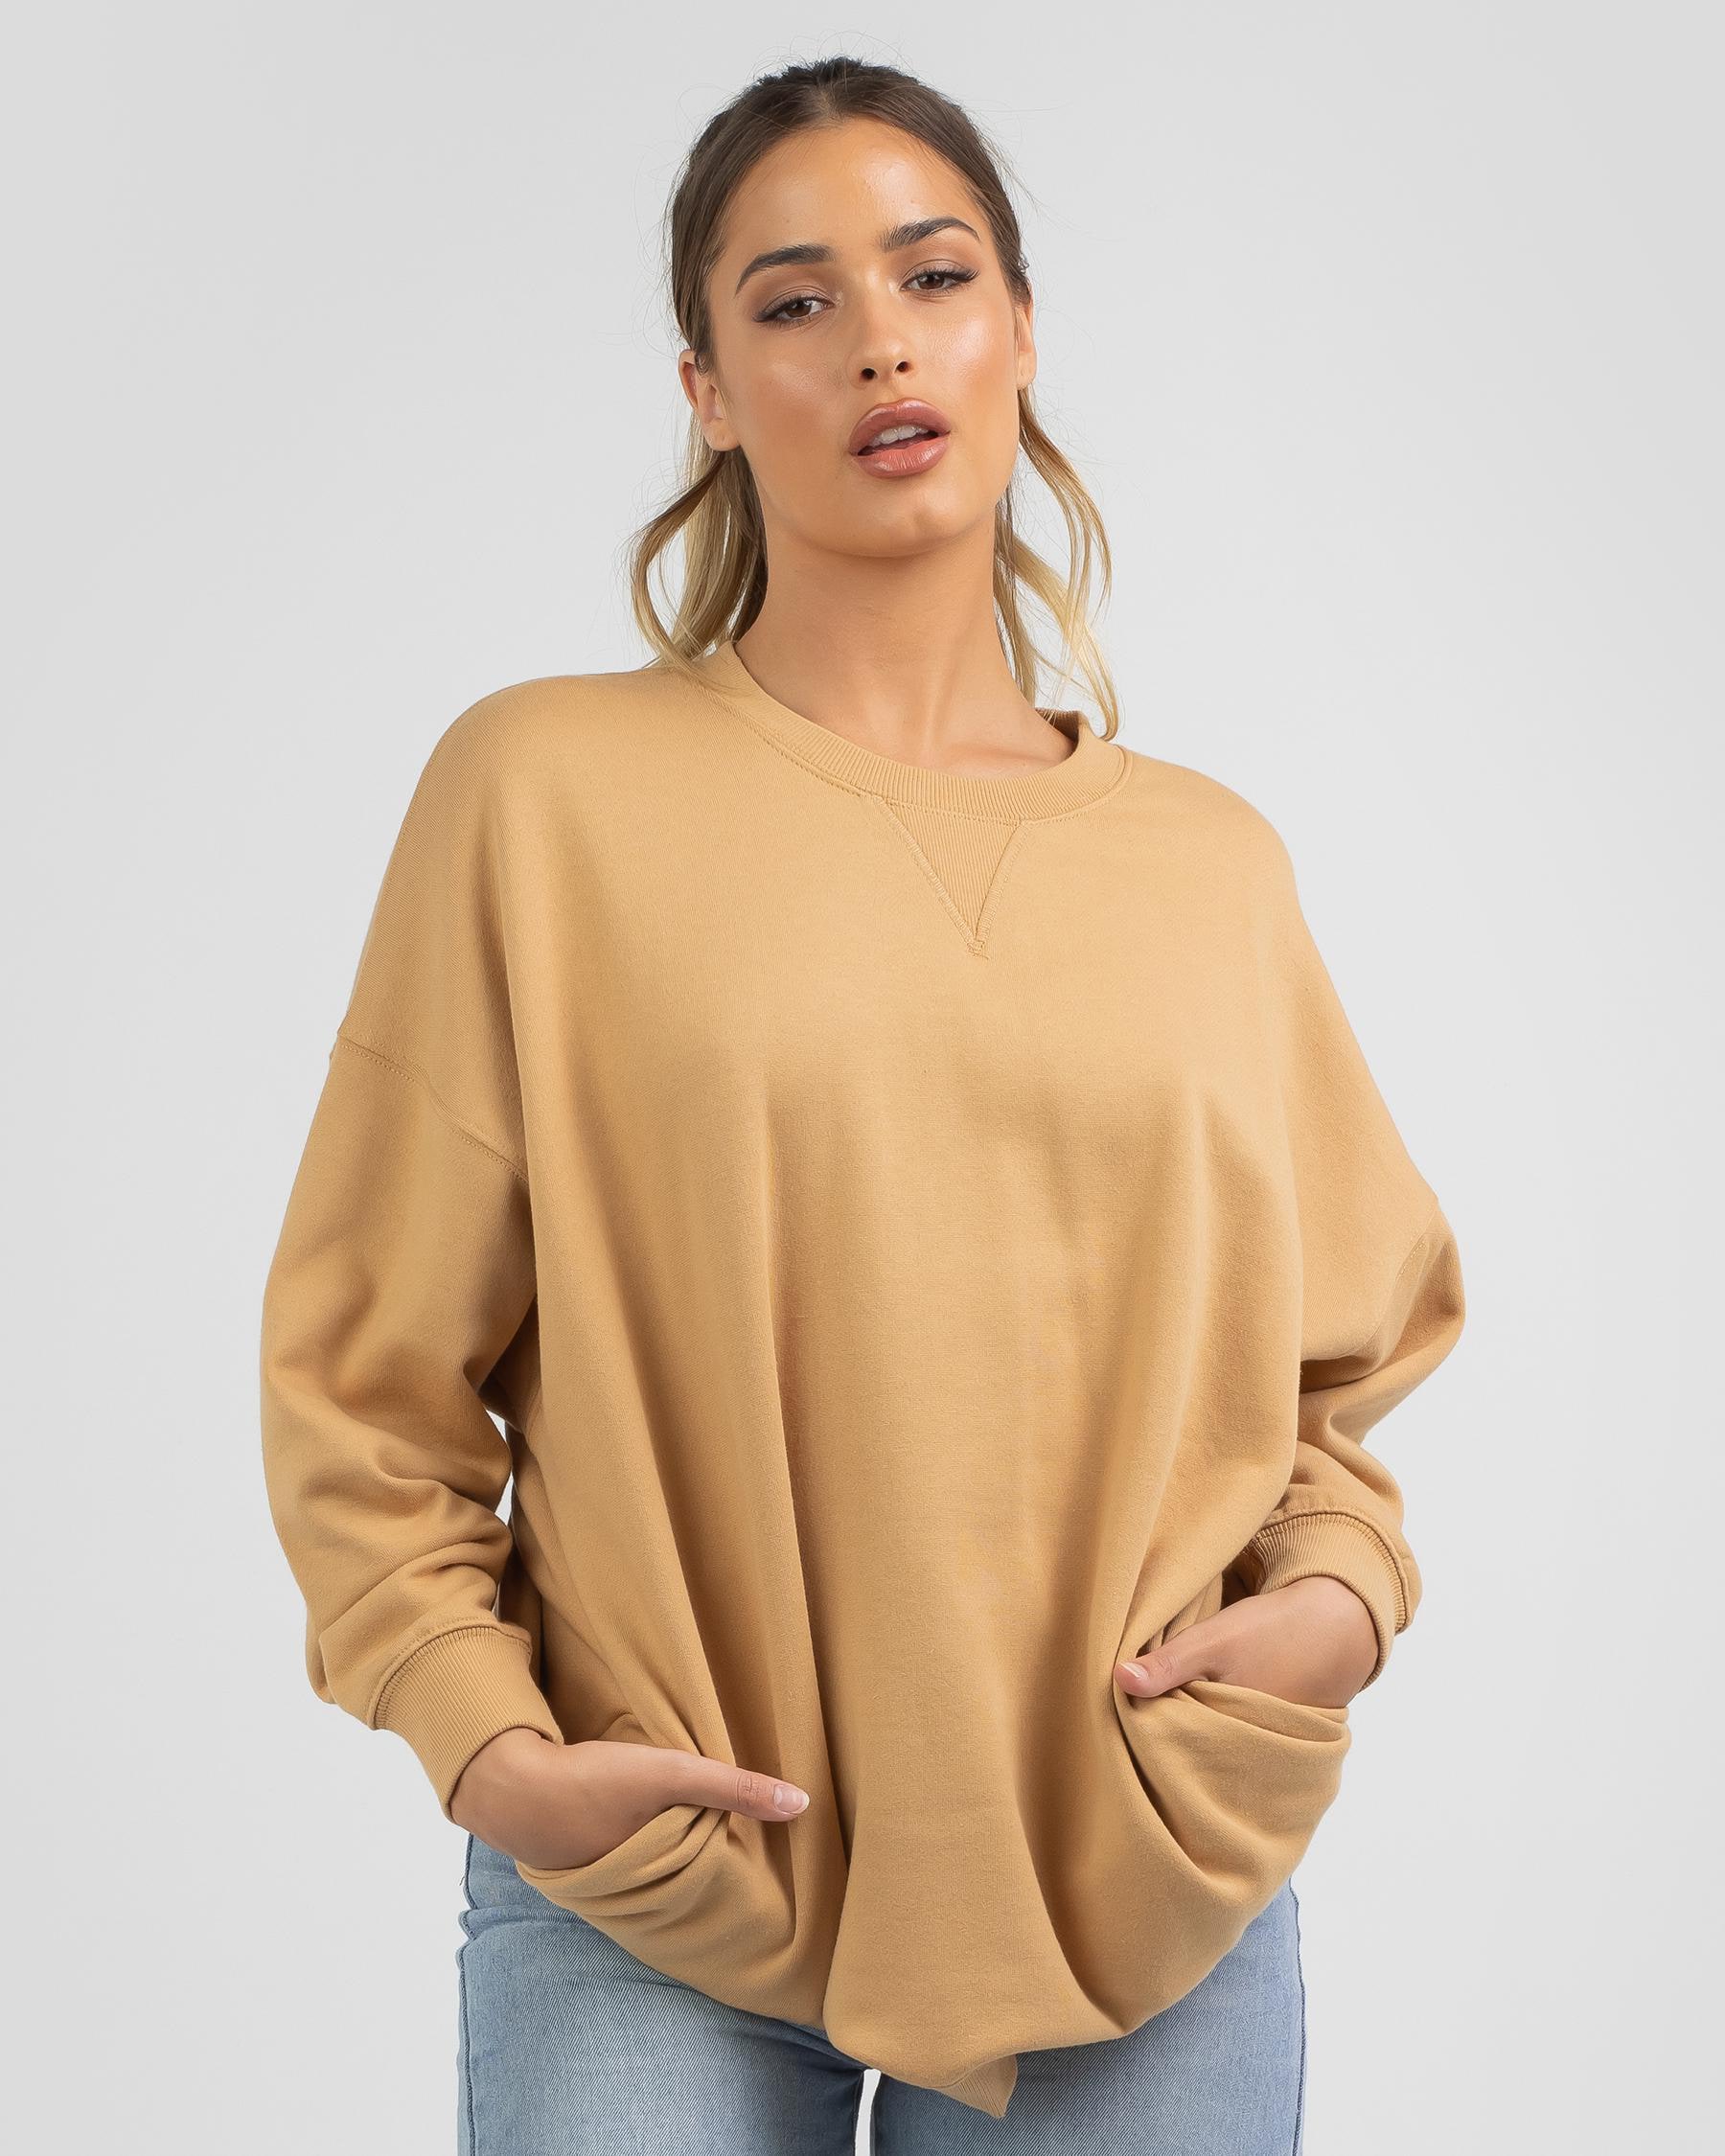 Ava And Ever Zane Sweatshirt In Camel - Fast Shipping & Easy Returns ...